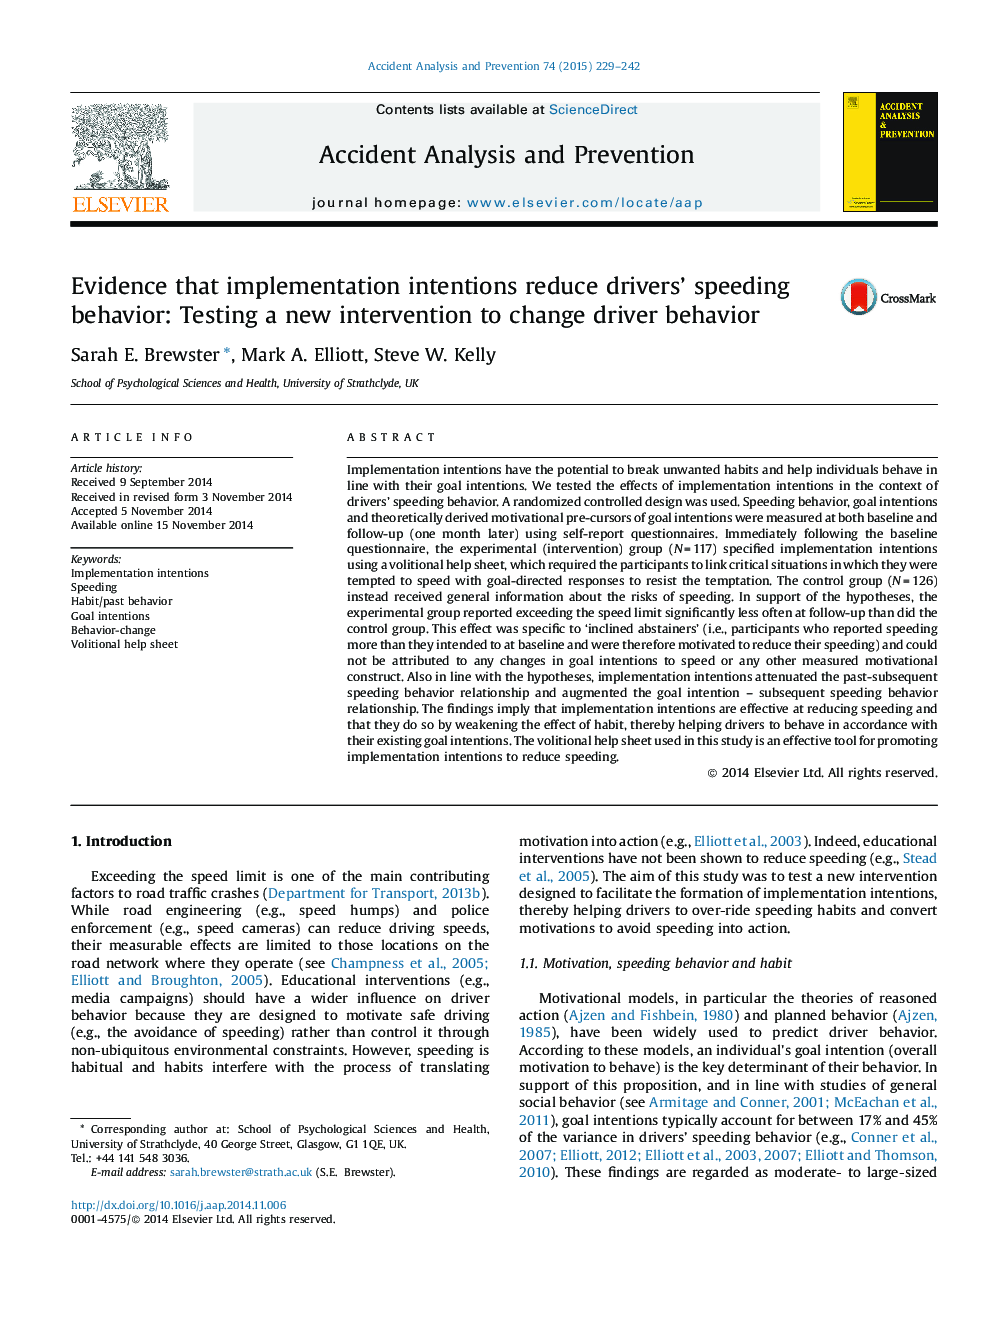 Evidence that implementation intentions reduce drivers' speeding behavior: Testing a new intervention to change driver behavior